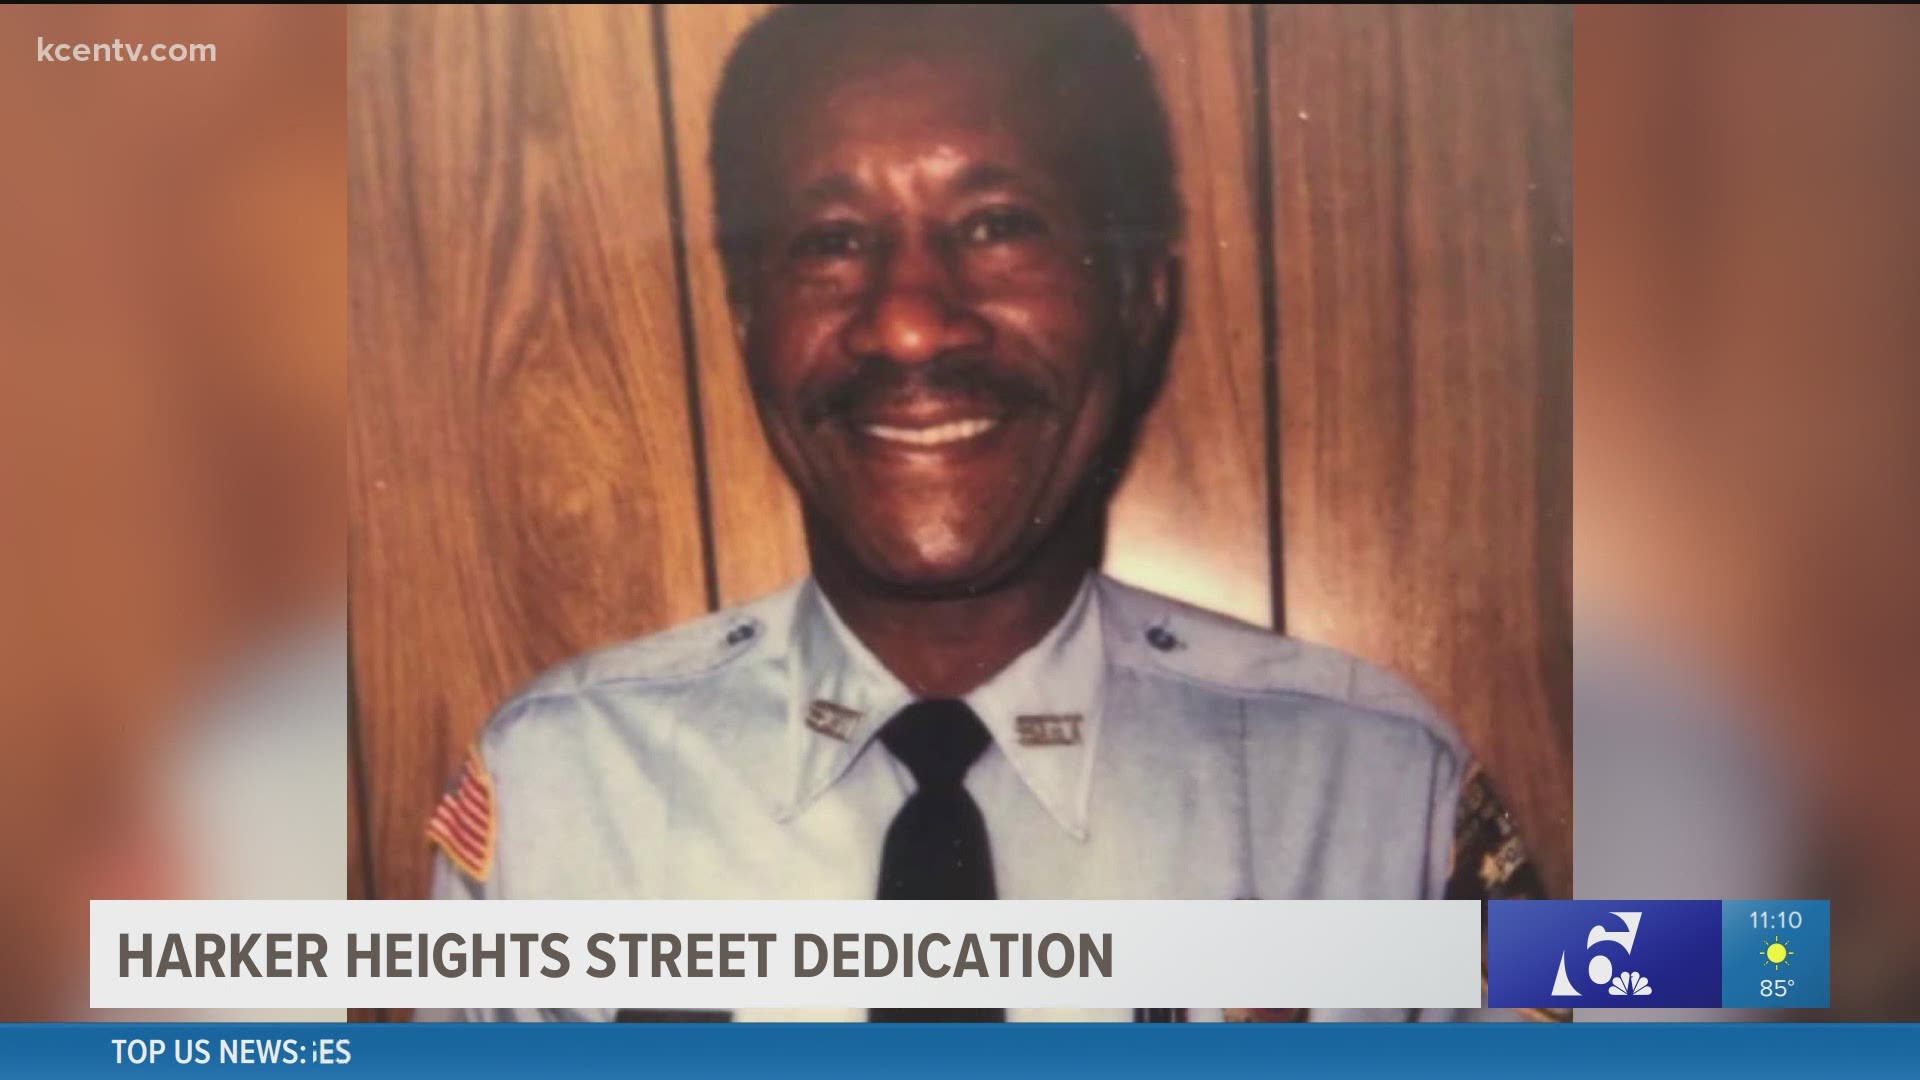 Nichols joined the Harker Heights Police Department in 1972 and retired in 1985. During his time on the force, he became one of the department's first two detectives